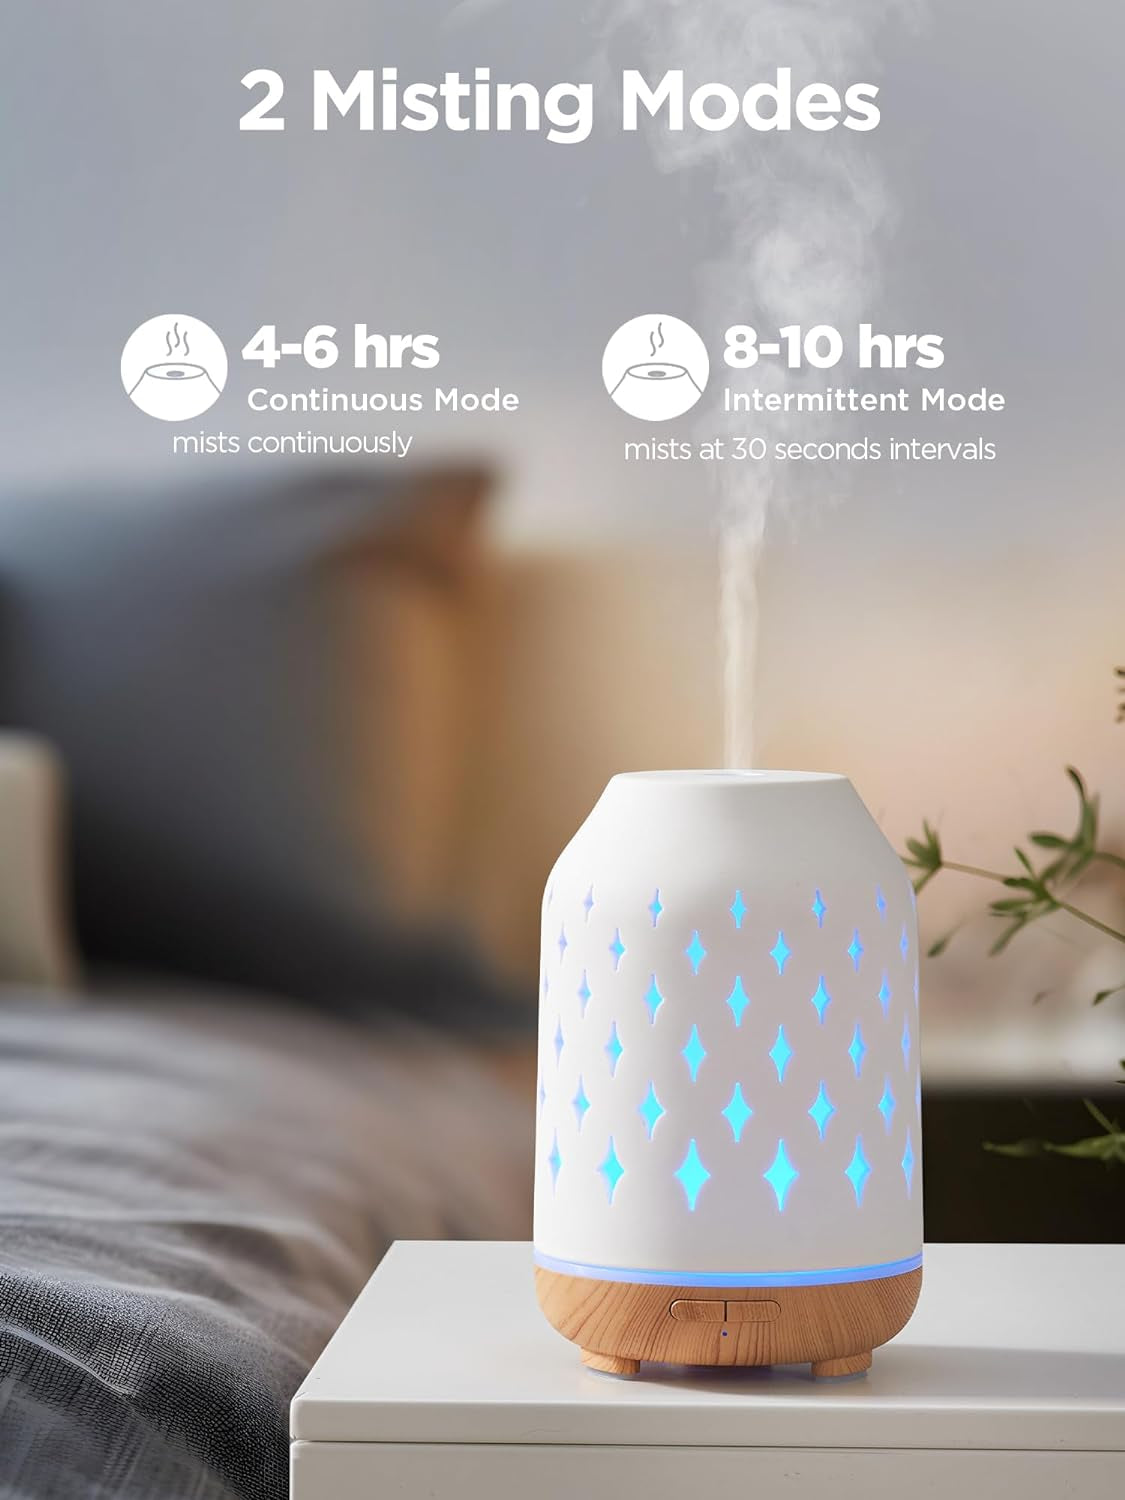 Aromatherapy Diffuser, 150Ml Ceramic Diffuser Ultrasonic Humidifier Cool Mist Essential Oil Diffusers for Home Air Diffuser with 2 Mist Modes Waterless Auto Off, White